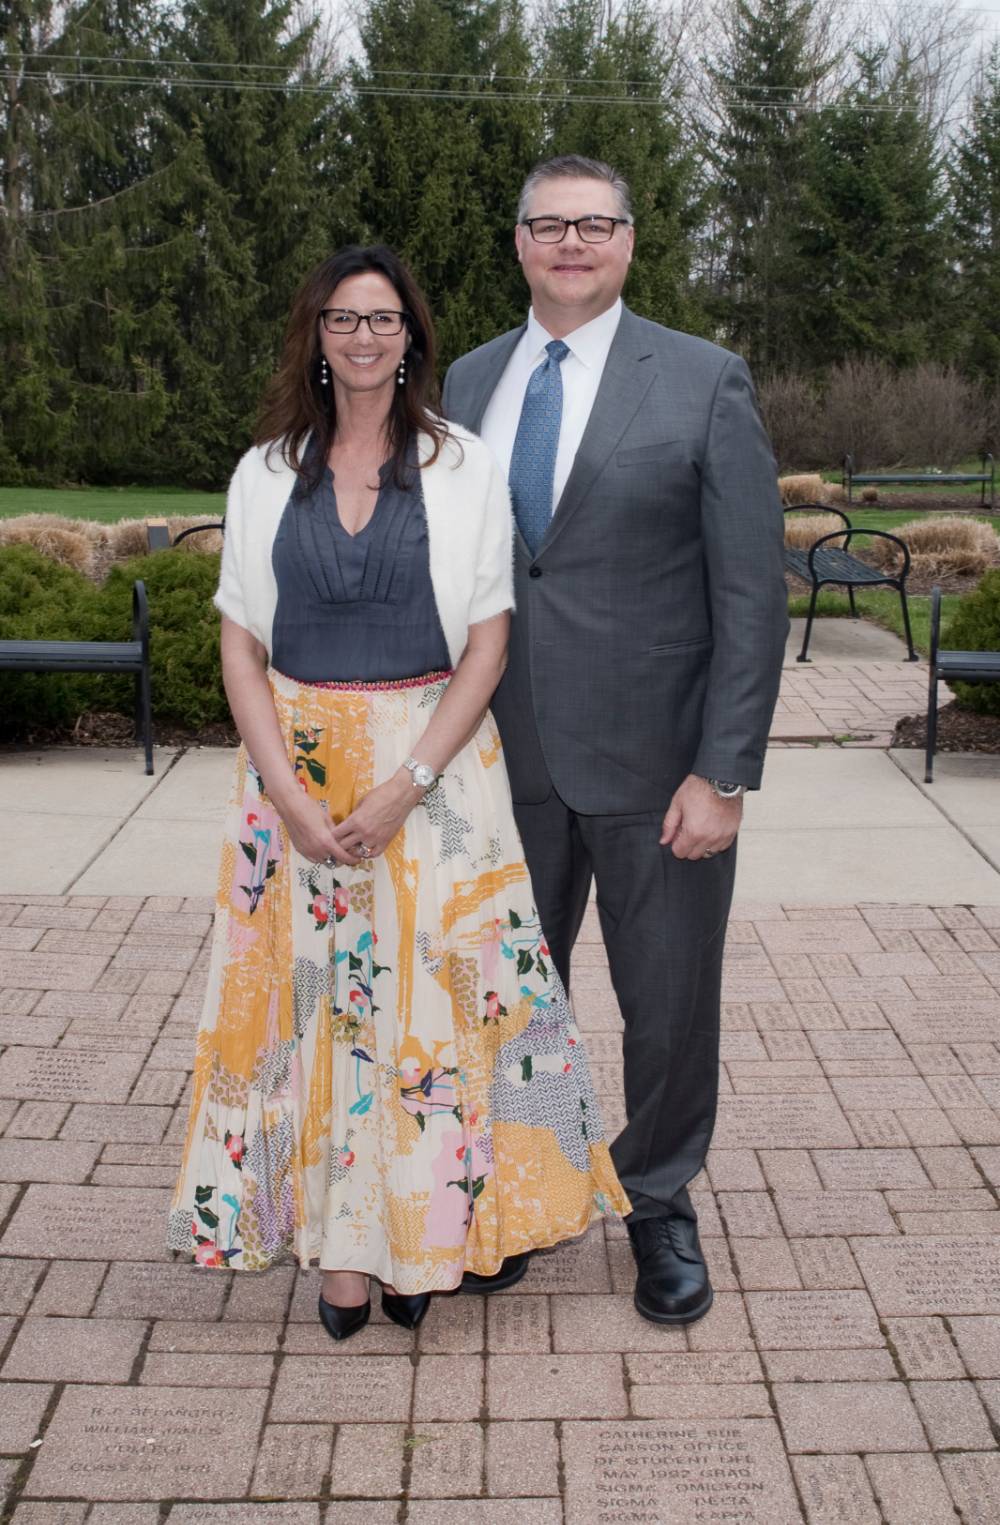 Award winner poses with wife (outdoors)